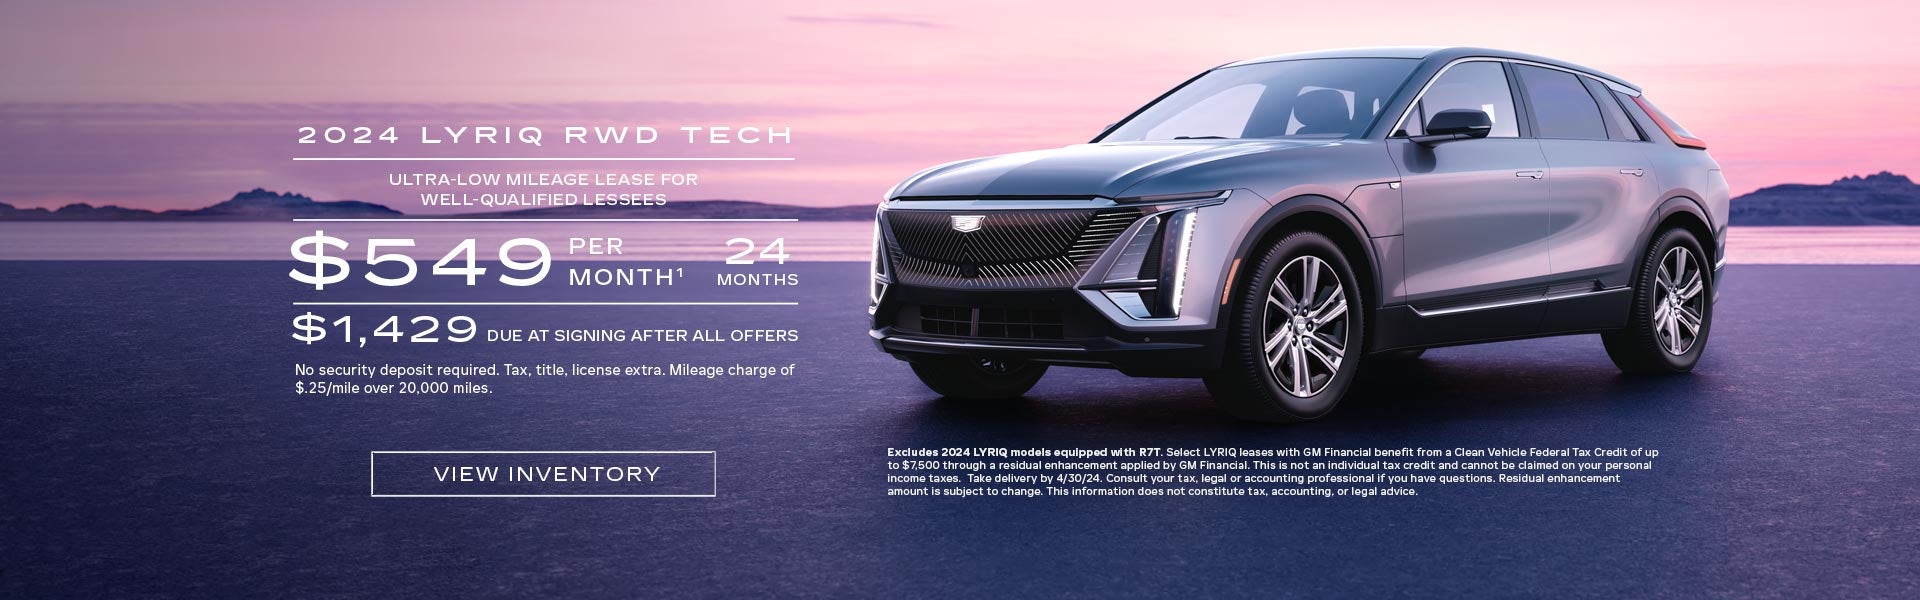 2024 LYRIQ RWD TECH. Ultra-low milege lease for well-qualified lessees. $549 per month for 24 mon...